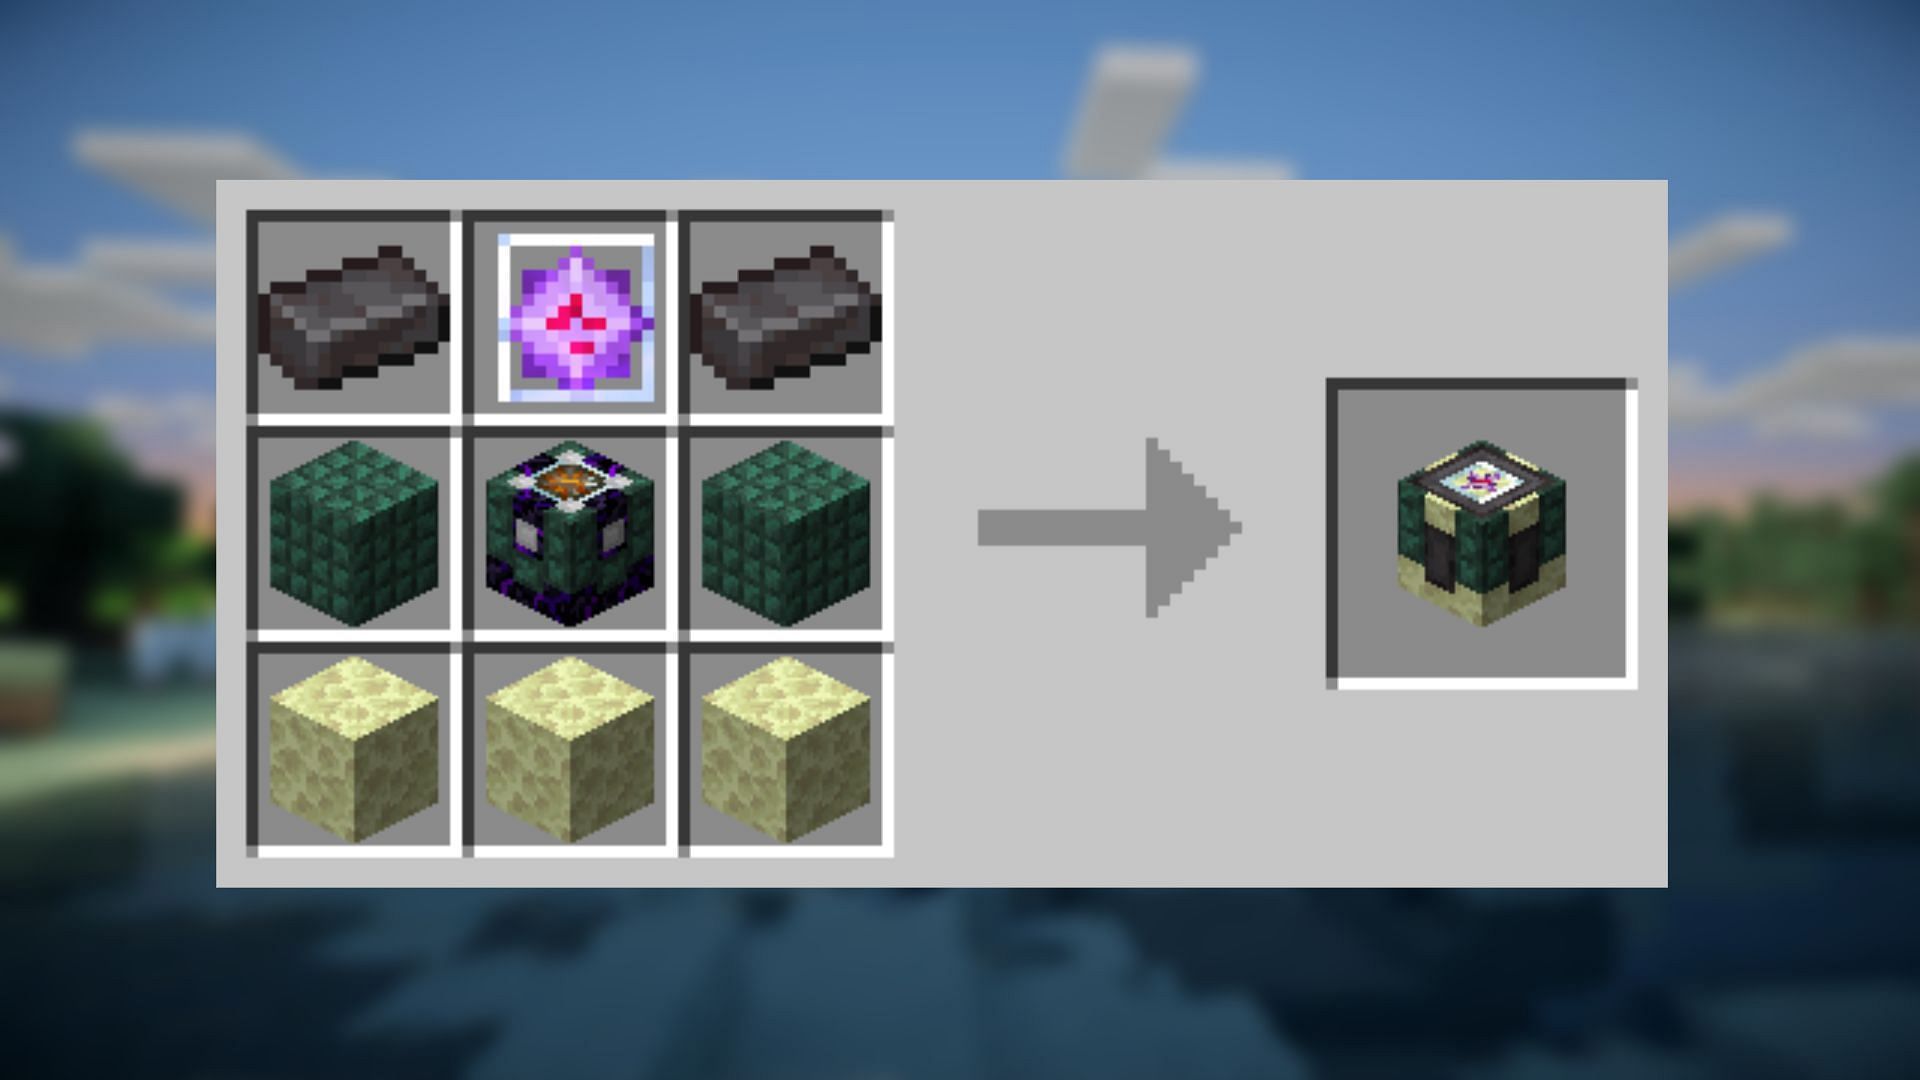 The recipe for the advanced uncrafter in Minecraft. (Image via Ketheroth/CurseForge)